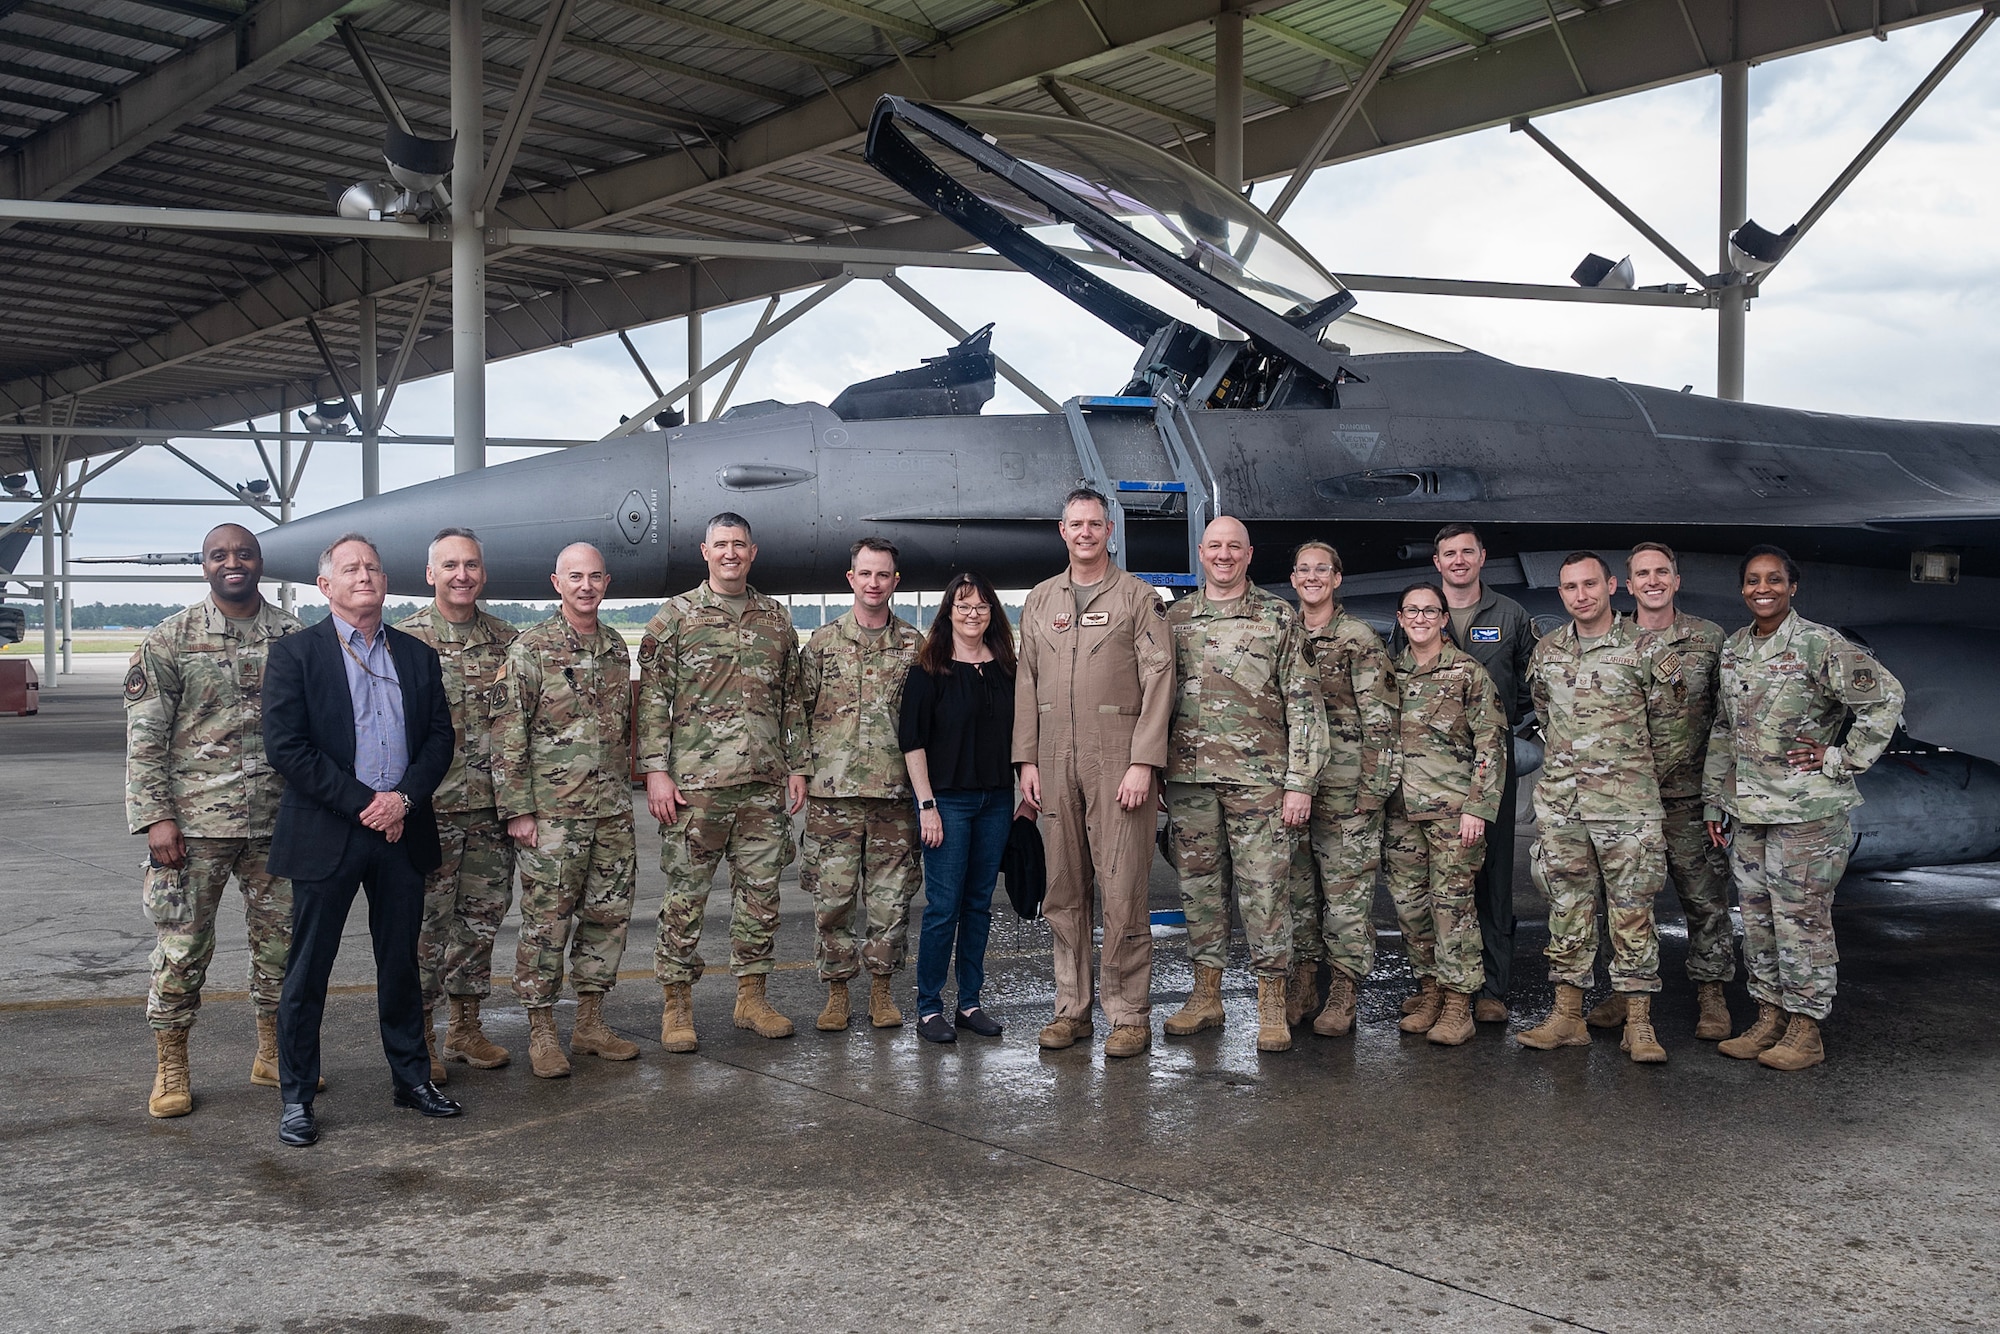 Lt. Gen. Grynkewich, center right, 9th AF (AFCENT) commander, and his spouse, Shannon Grynkewich, center left, pose for a group photo with AFCENT Airmen and senior leaders during Gen. Grynkewich’s final flight as the AFCENT commander.